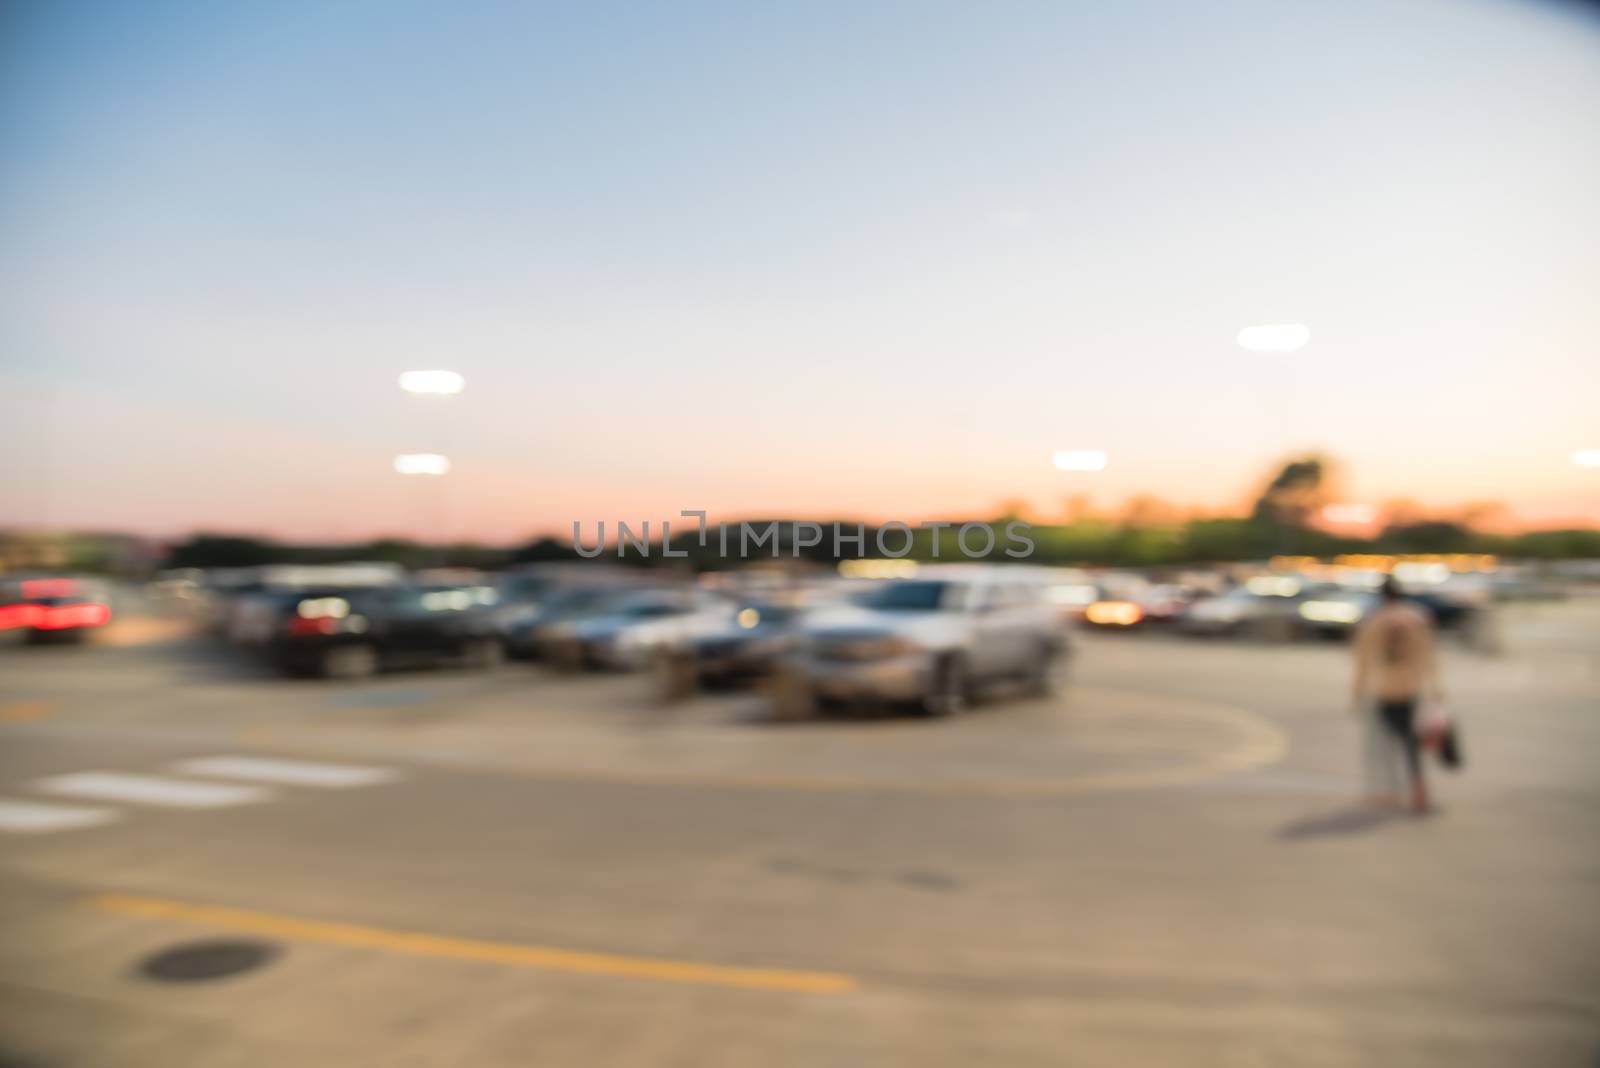 Motion blurred customer out shopping in holidays season at modern shopping center in Humble, Texas, US. Busy outdoor parking lots at sunset, mall complex uncovered parking with light lampposts